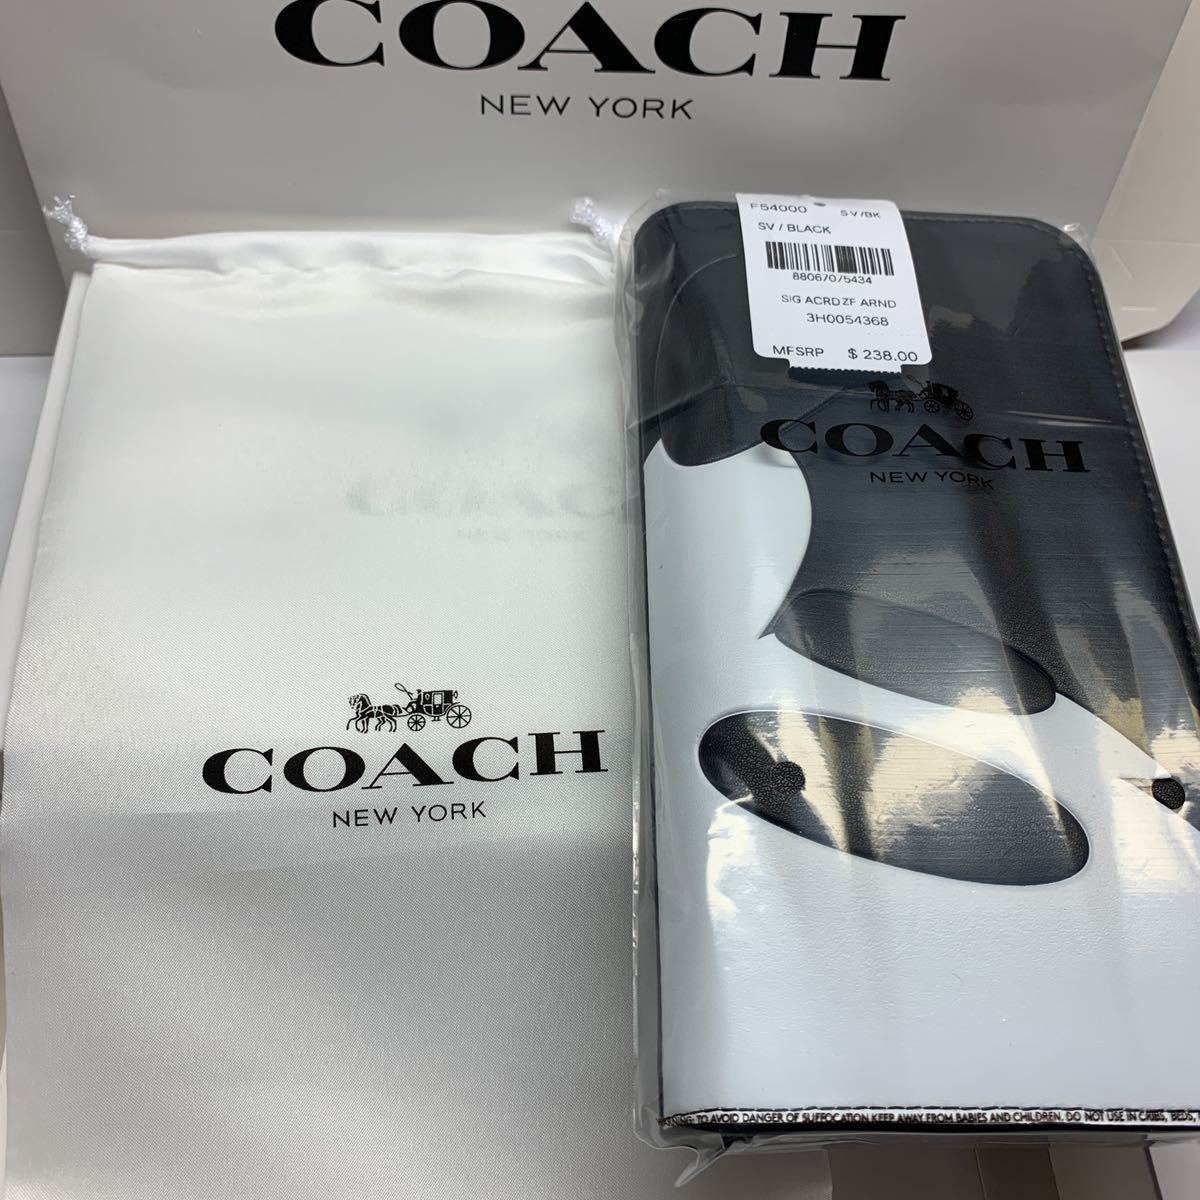 Coach 新品箱タグ付き 長財布 ディズニーコラボ ミッキー横顔 F ミッキー７５周年記念コーチコラボ限定品 アウトレット 翌日発送 Product Details Yahoo Auctions Japan Proxy Bidding And Shopping Service From Japan